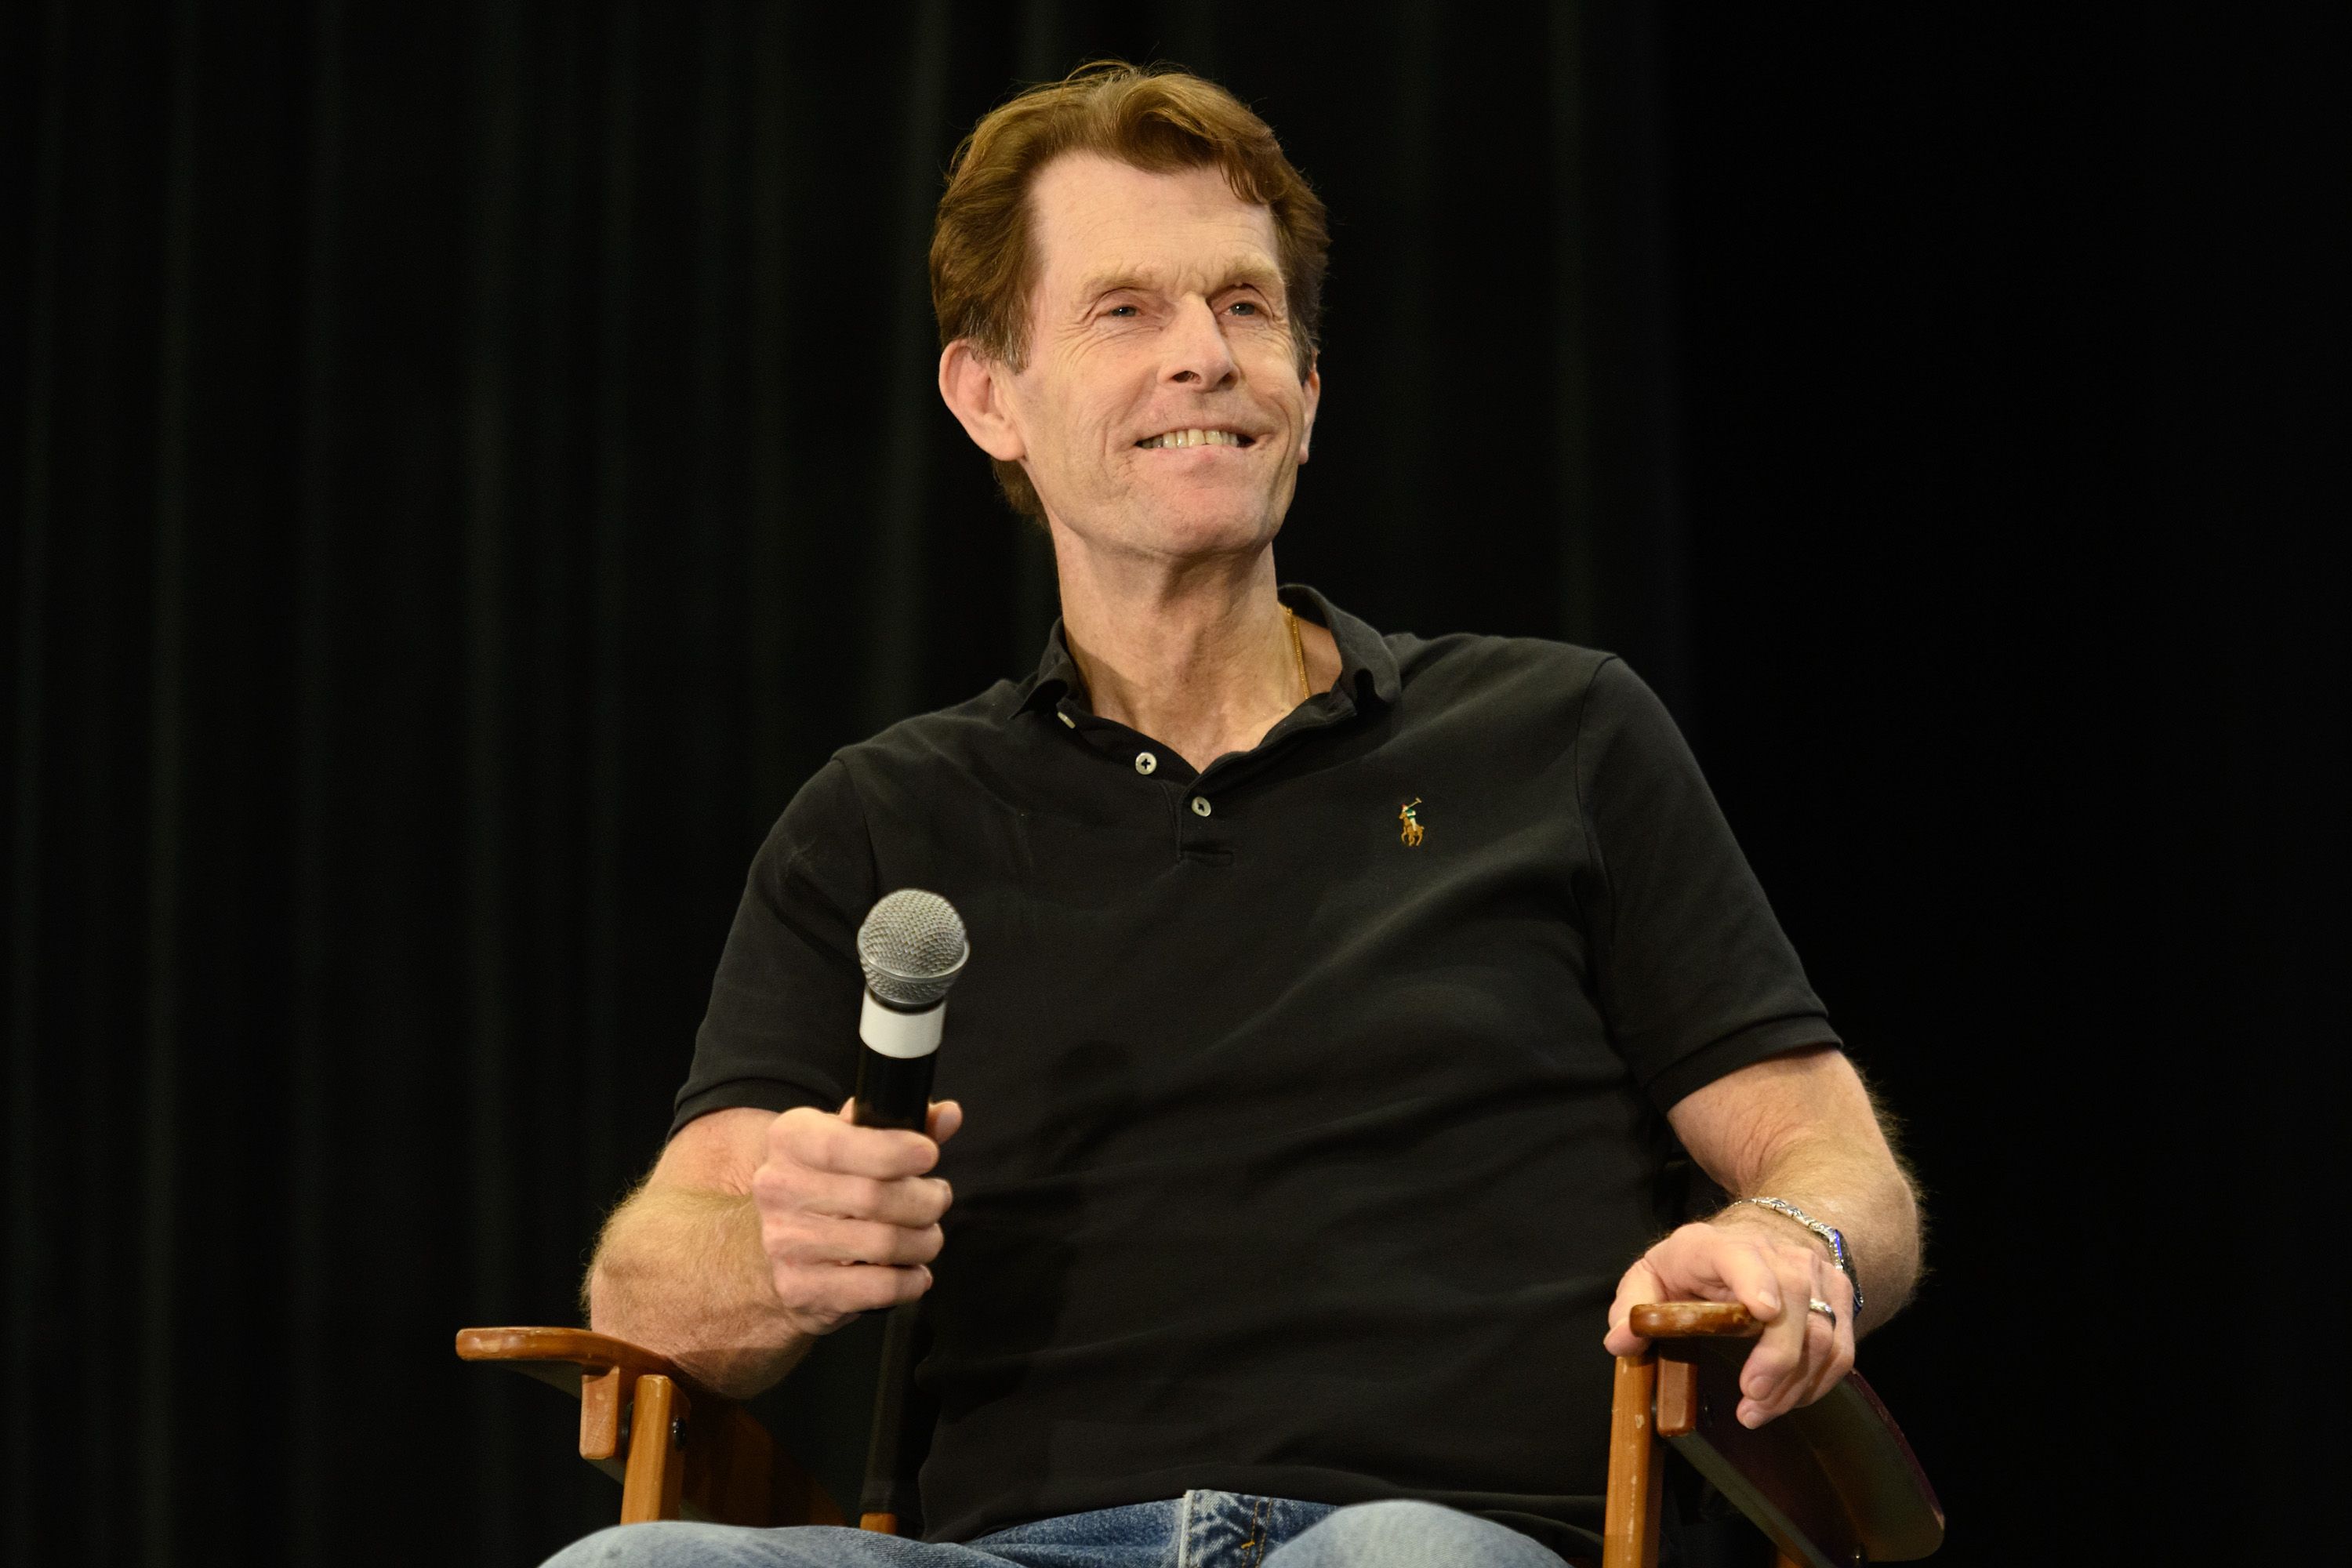 Batman star Kevin Conroy dies aged 66 after lengthy illness as co-star pays  tribute - Irish Mirror Online